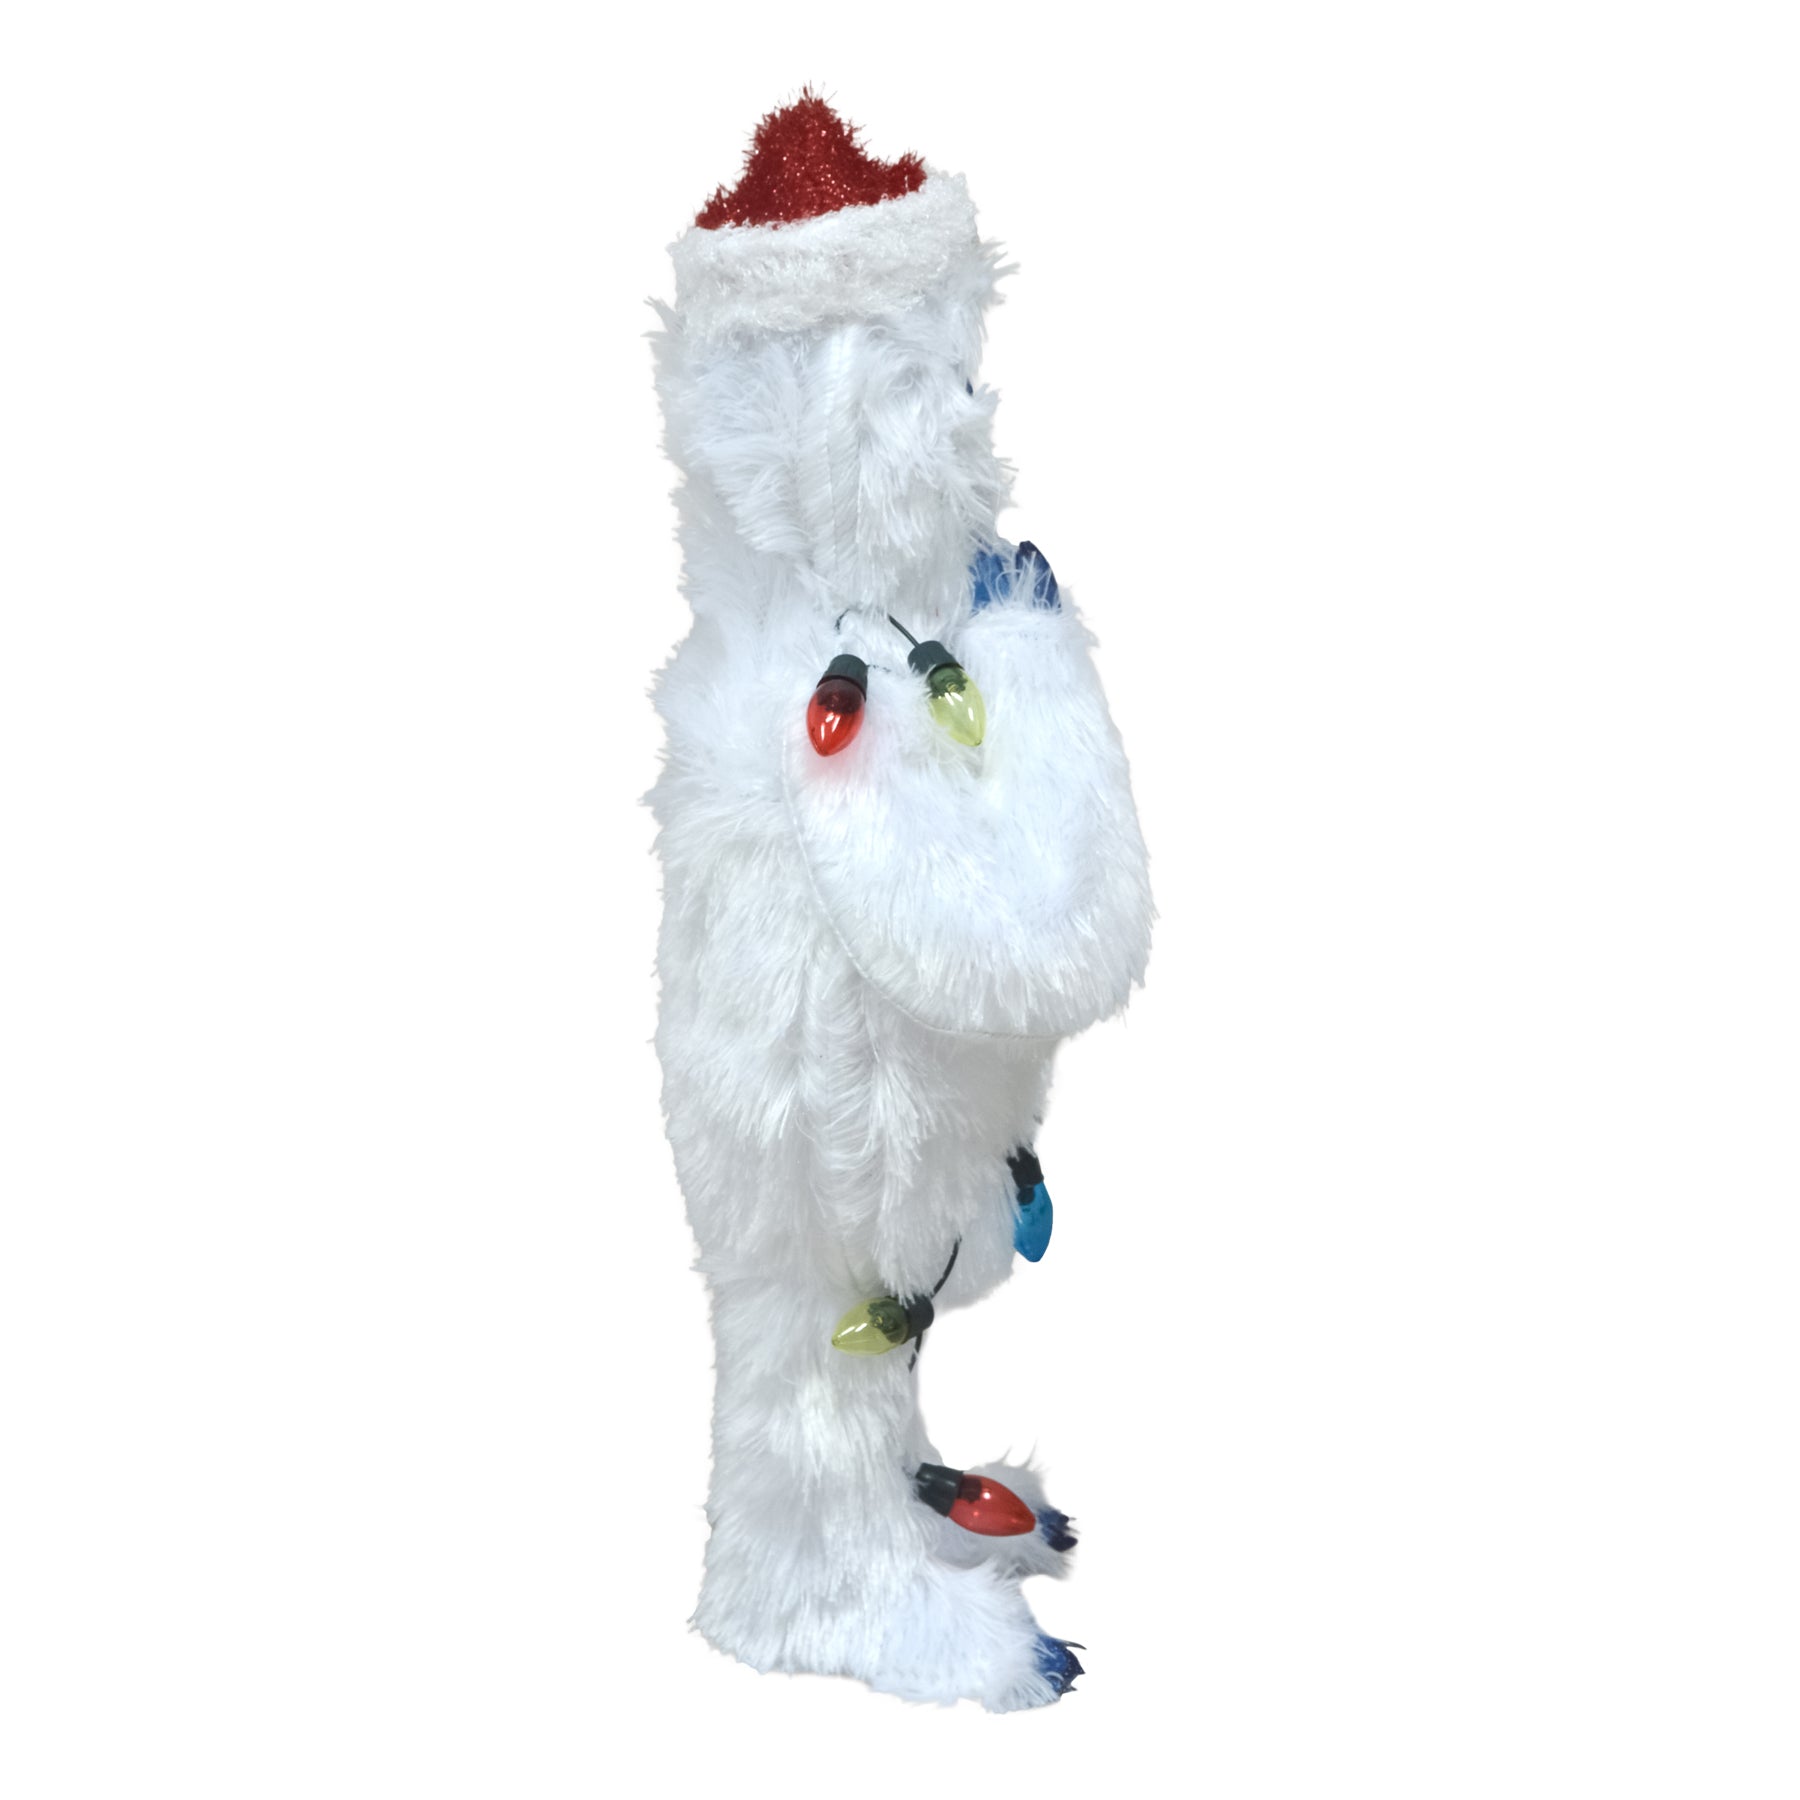 ProductWorks 24in RUDOLPH 3D LED YARD ART BUMBLE WITH LIGHT STRAND, White